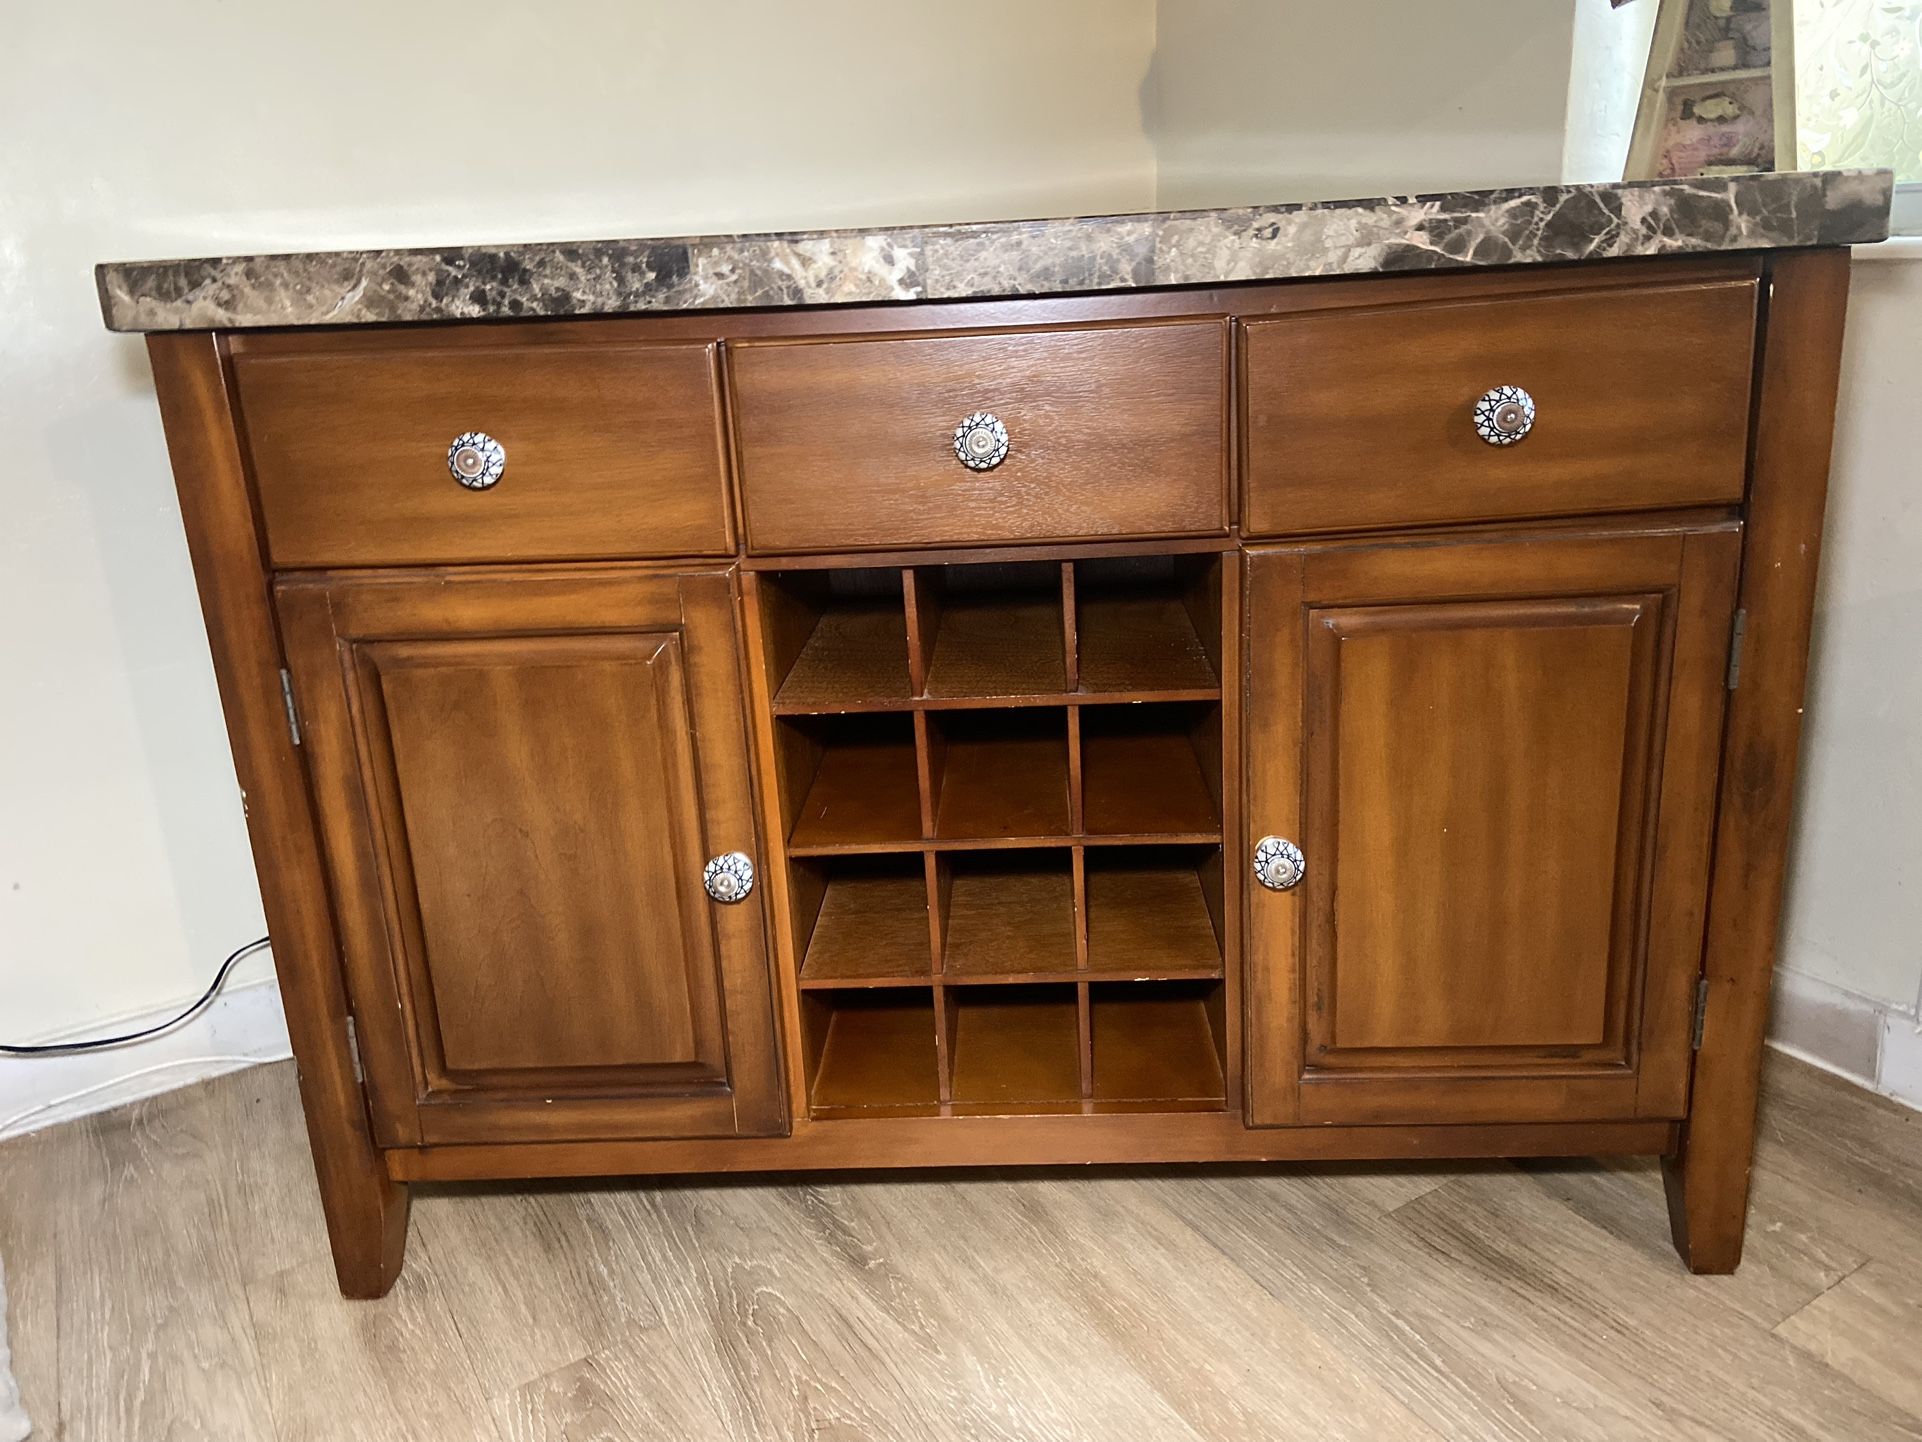 Buffet Cabinet With Wine Rack